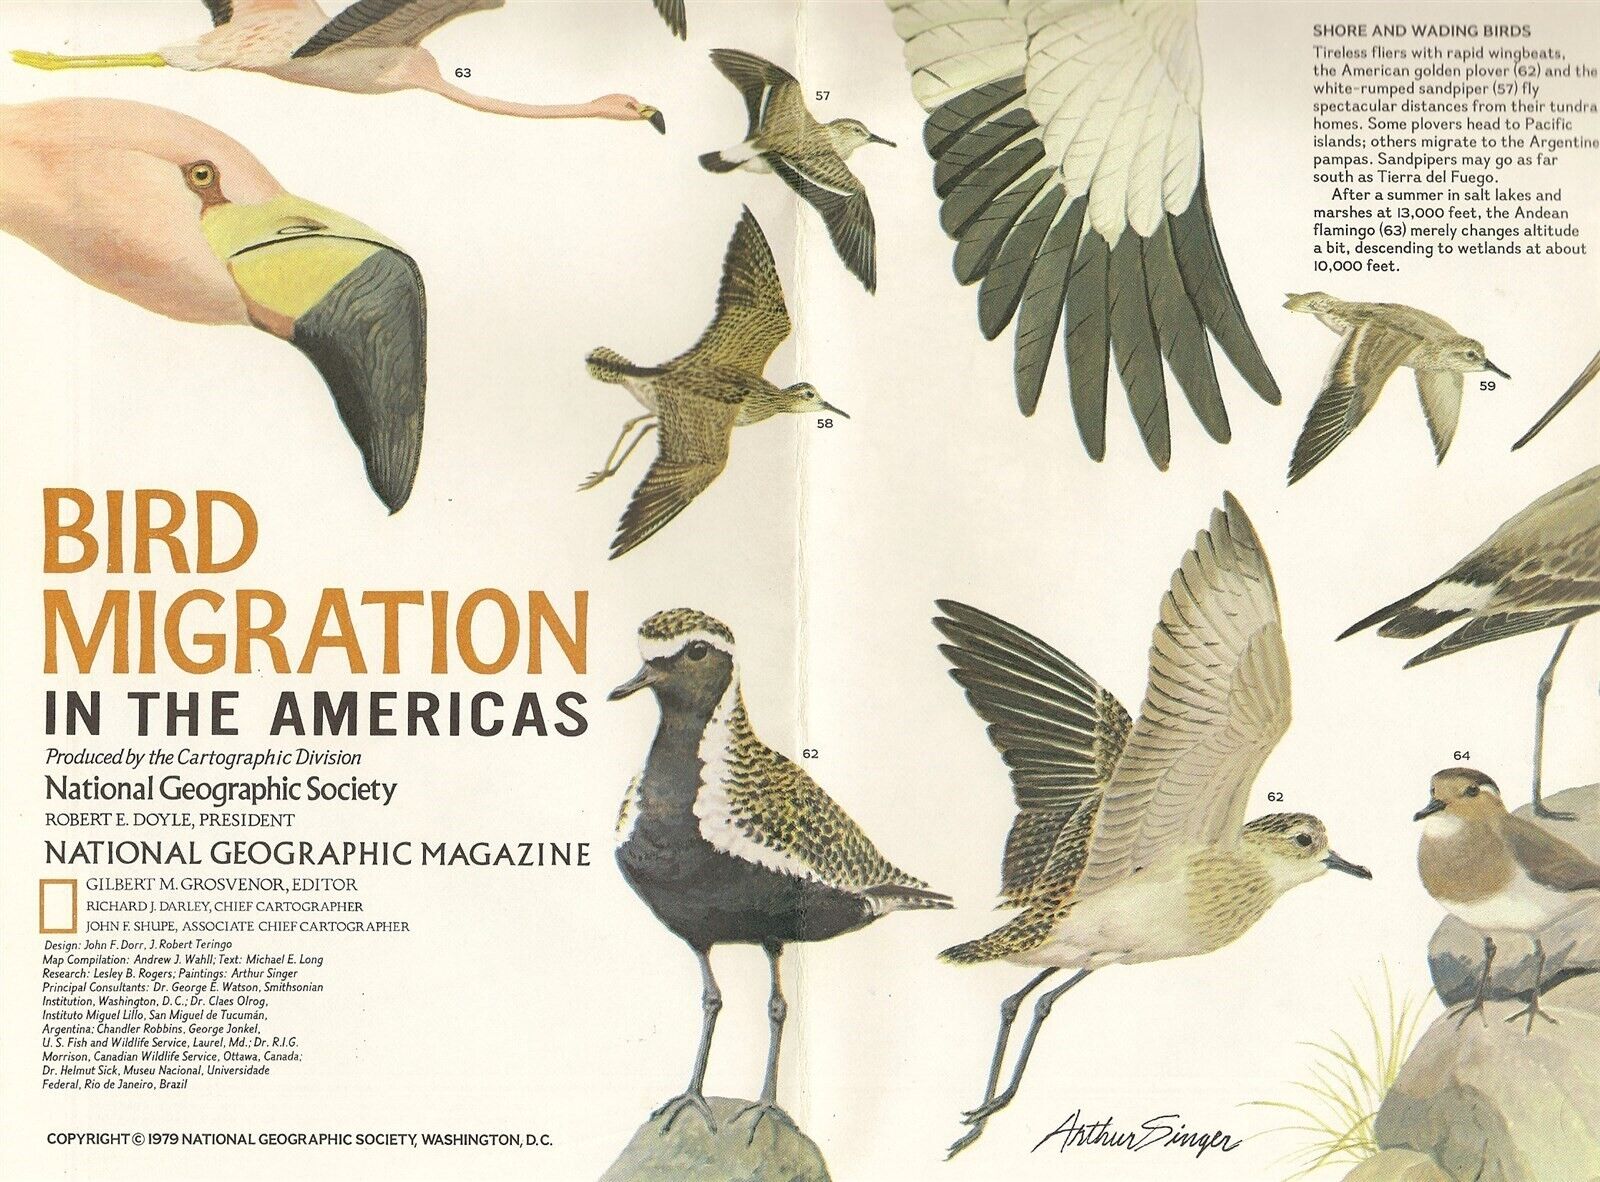 BIRD MIGRATION ROUTES Map North + South America Illustrations by Arthur Singer